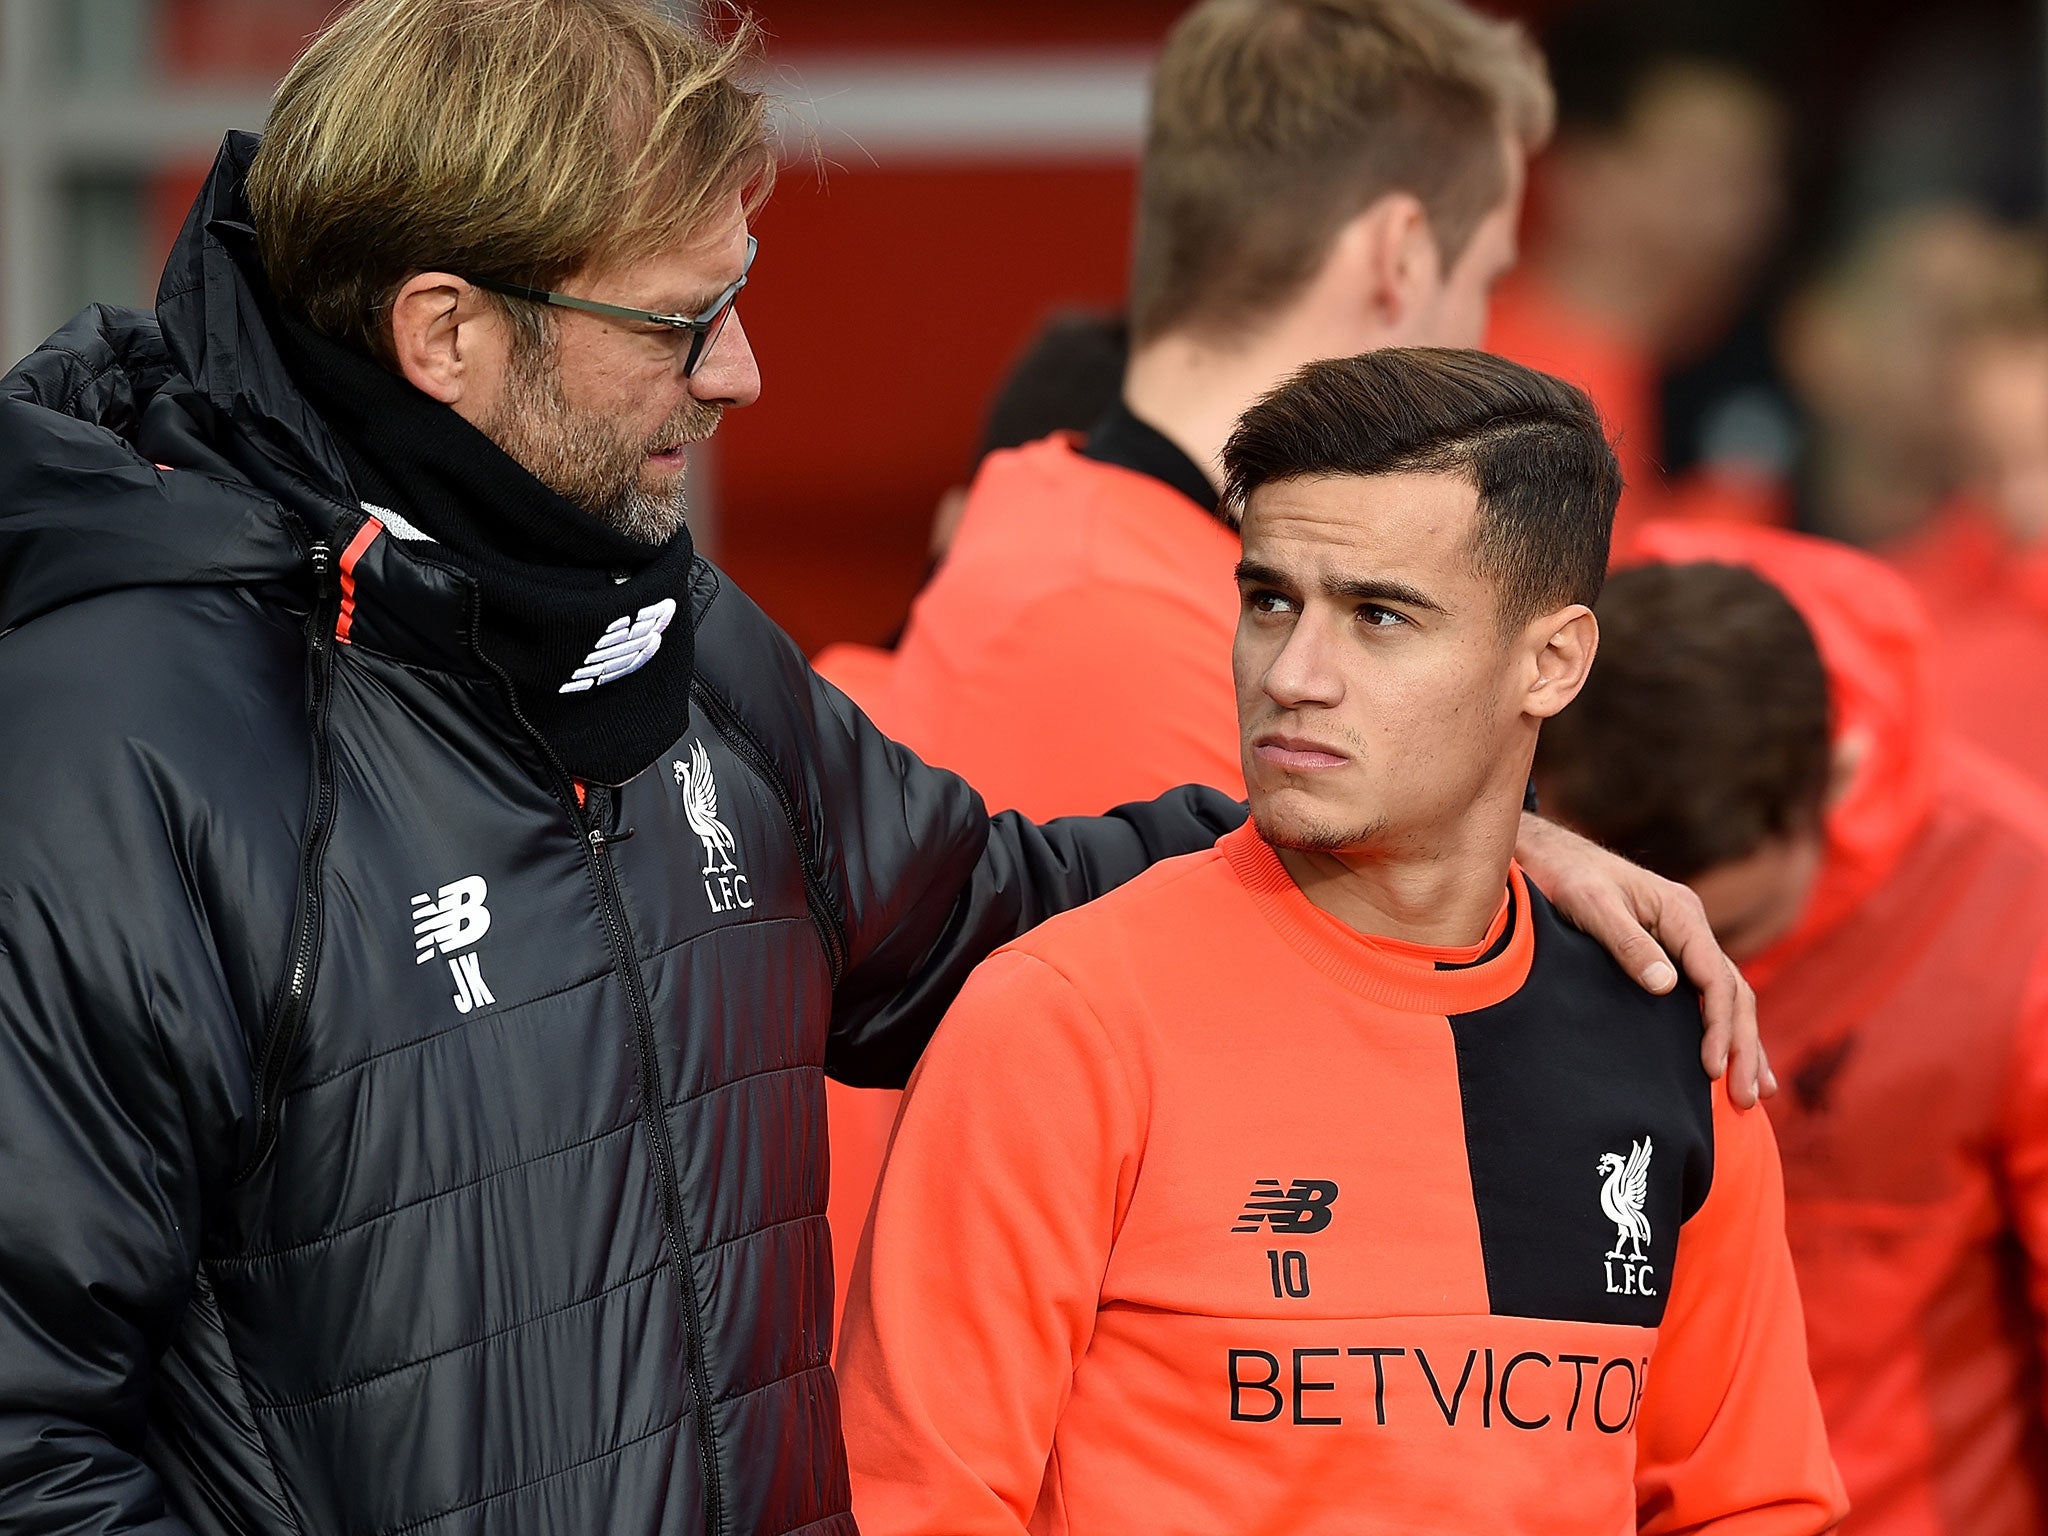 Philippe Coutinho is attracting interest from Barcelona